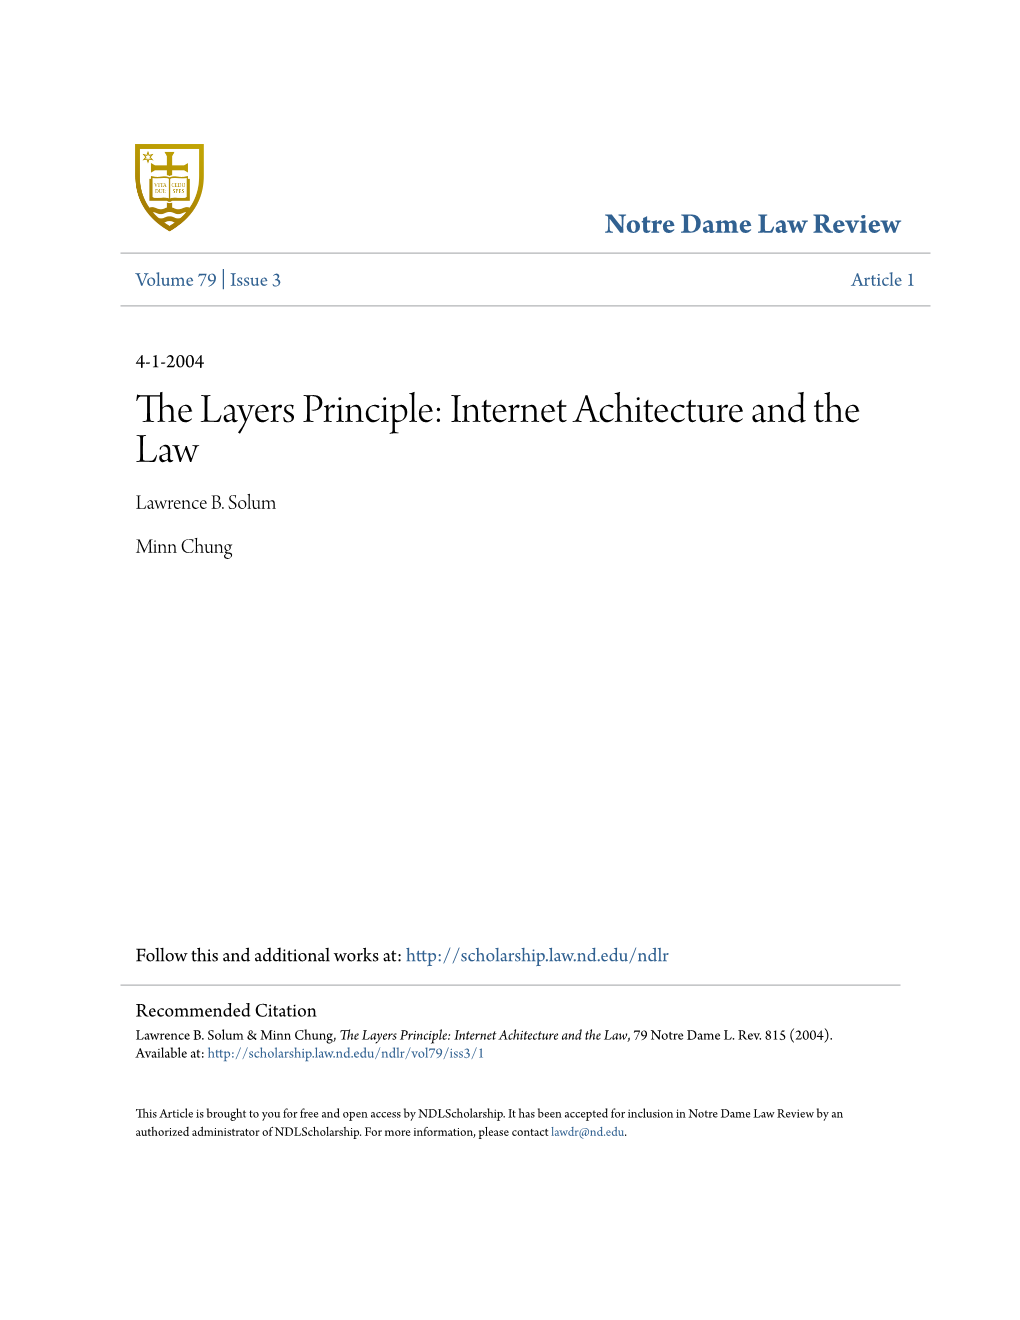 The Layers Principle: Internet Achitecture and the Law Lawrence B